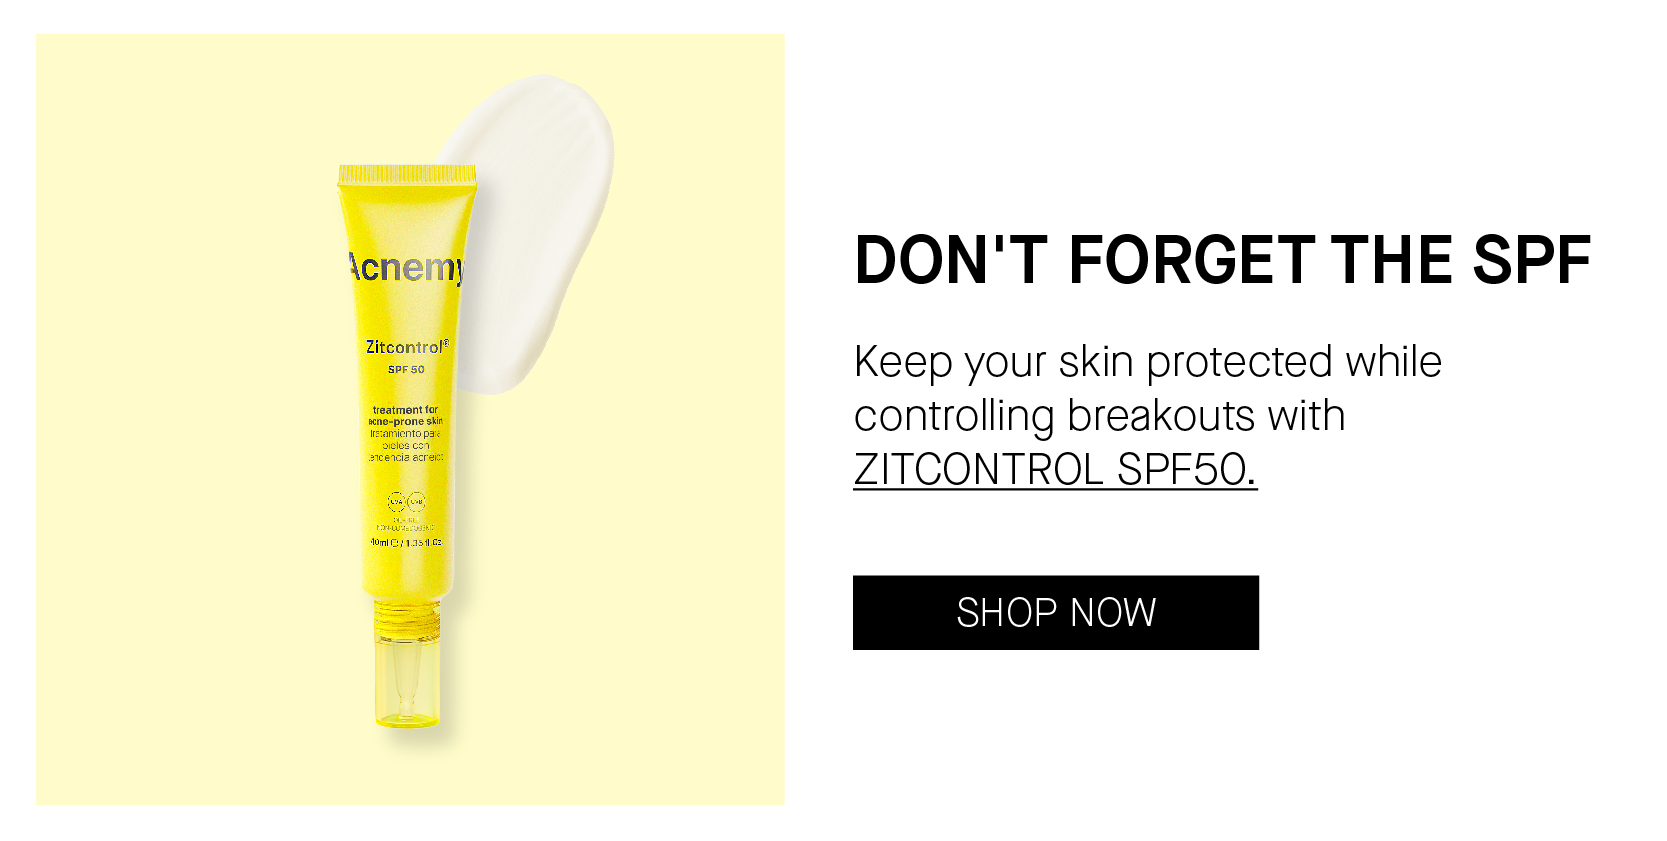  DON'T FORGET THE SPF Keep your skin protected while controlling breakouts with ZITCONTROL SPES0. 